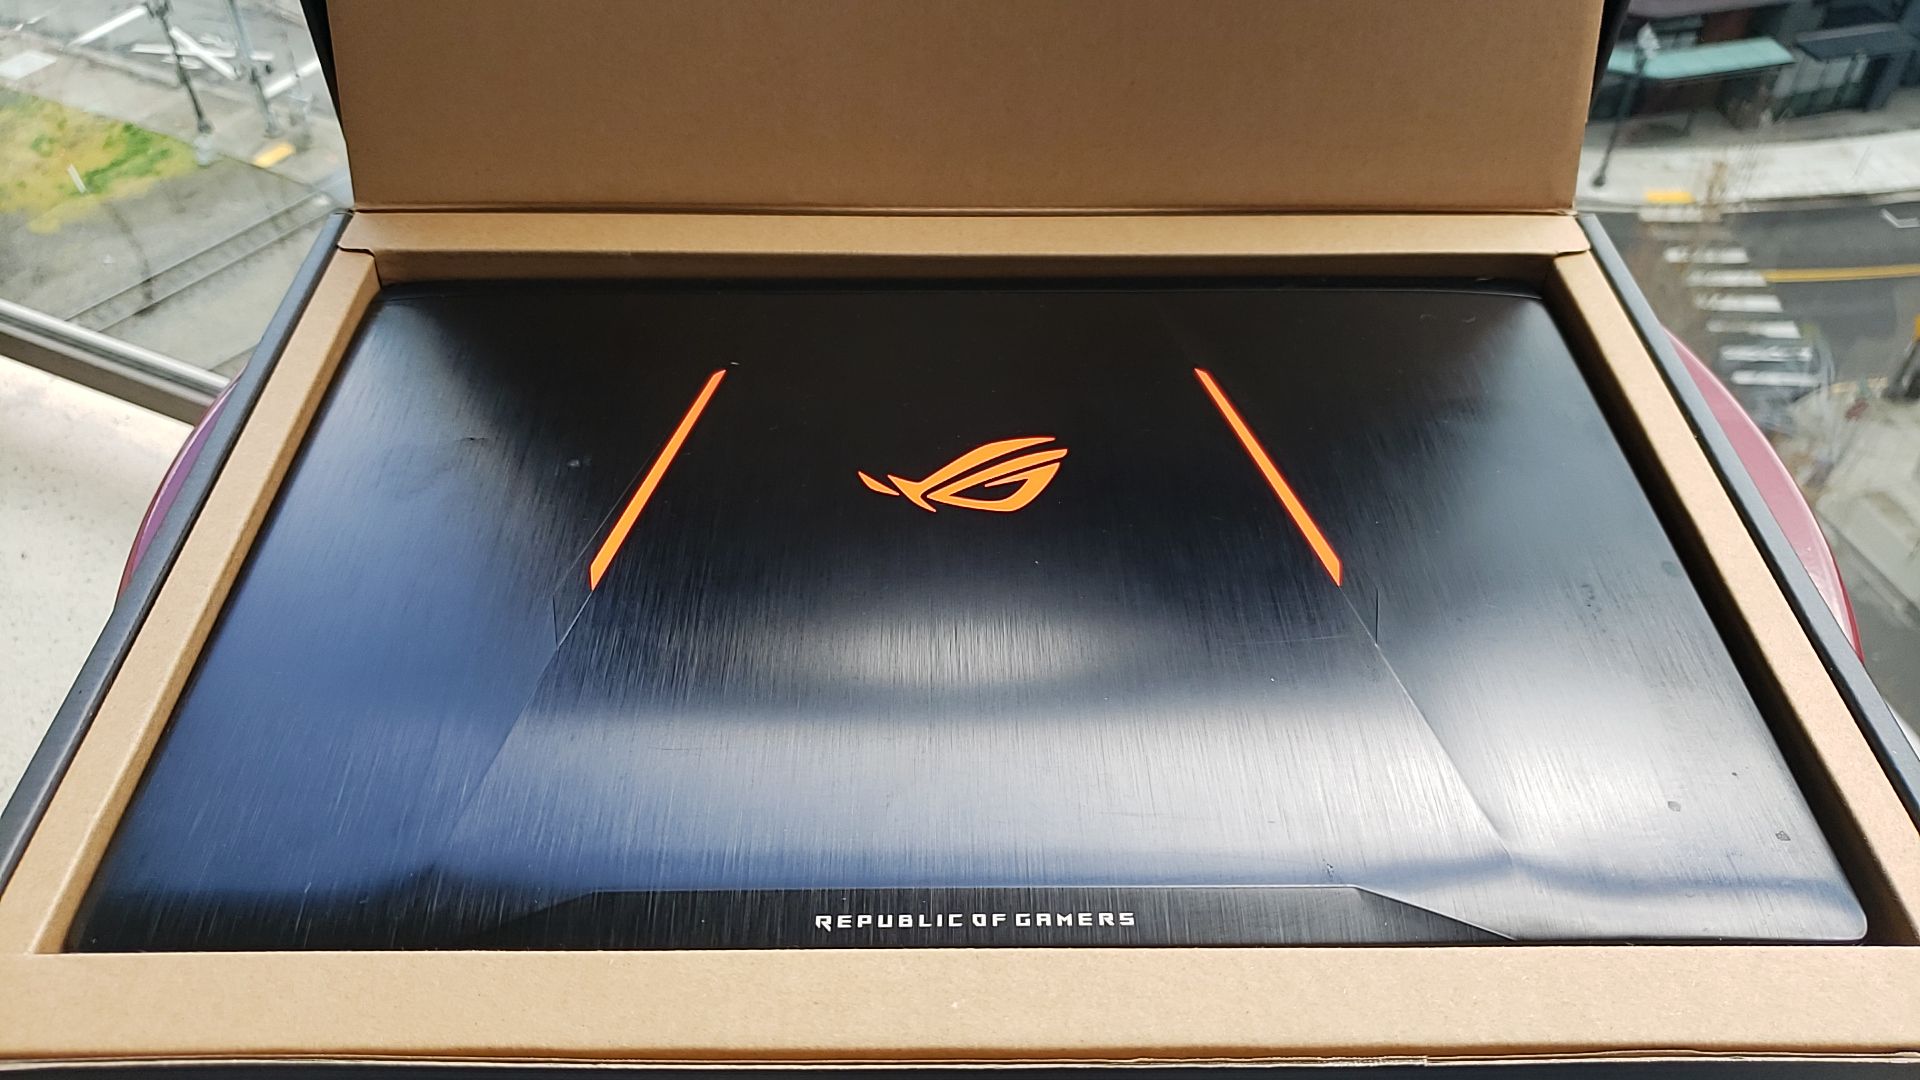 Brand new Asus republic of gamers notebook